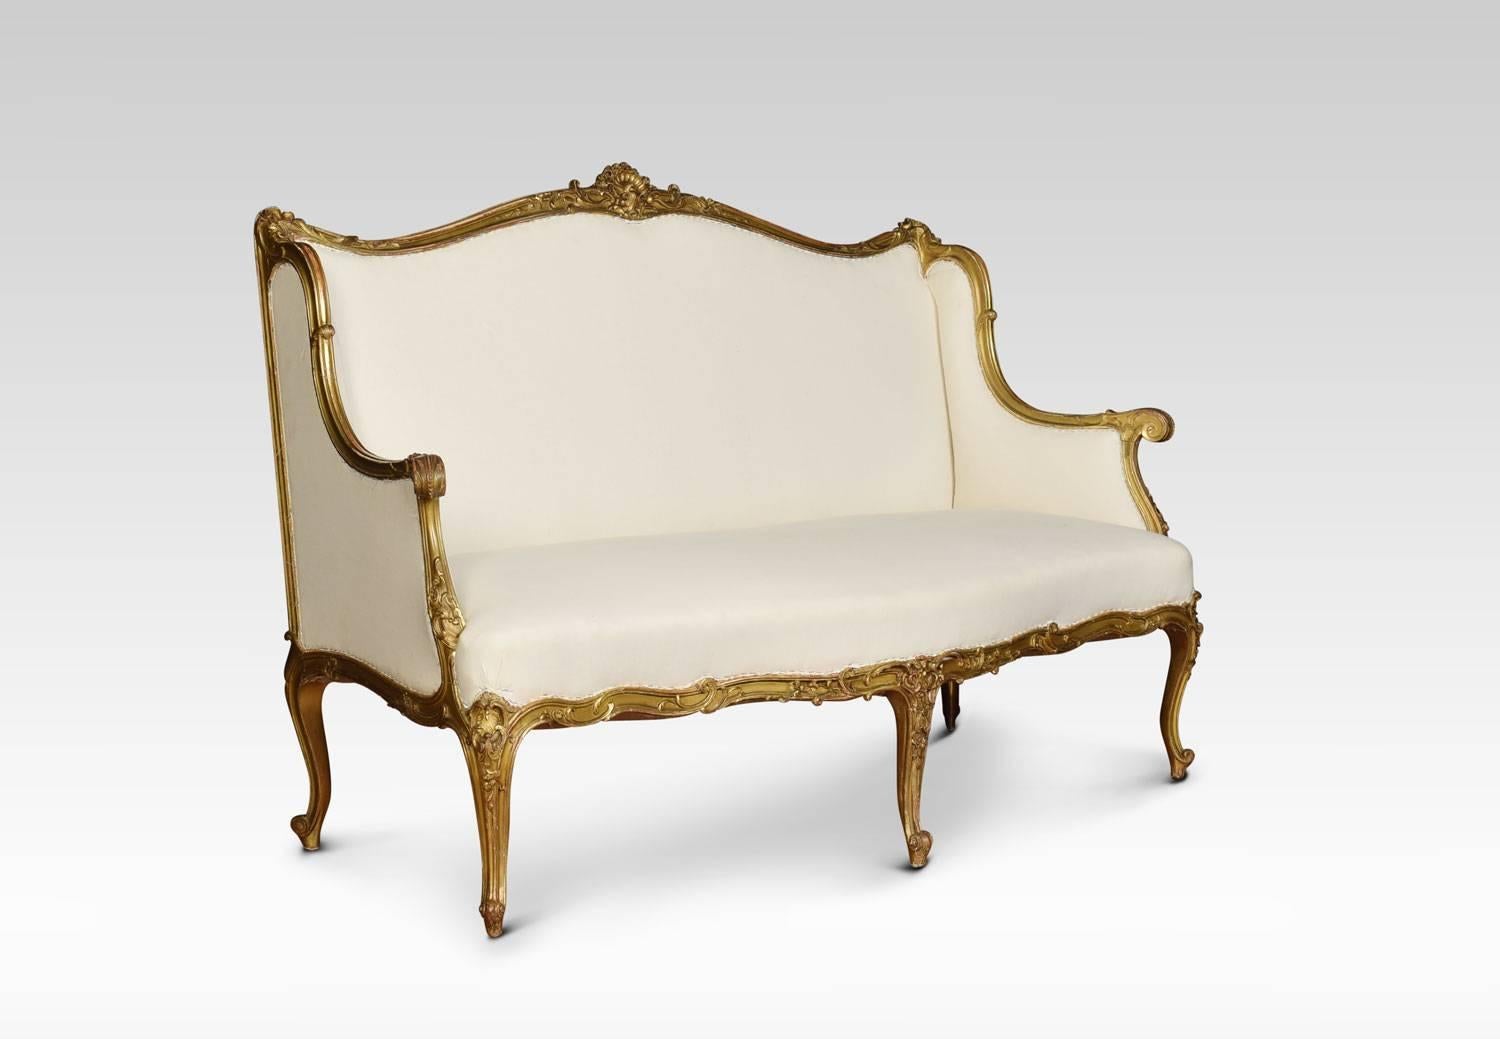 Louis XVI style giltwood settee, the shell carved scroll frame with sweeping arms to the stuff over seat which is finished in a calico ready to be upholstered in fabric, to the C scroll carved frieze. All raised up on slender cabriole